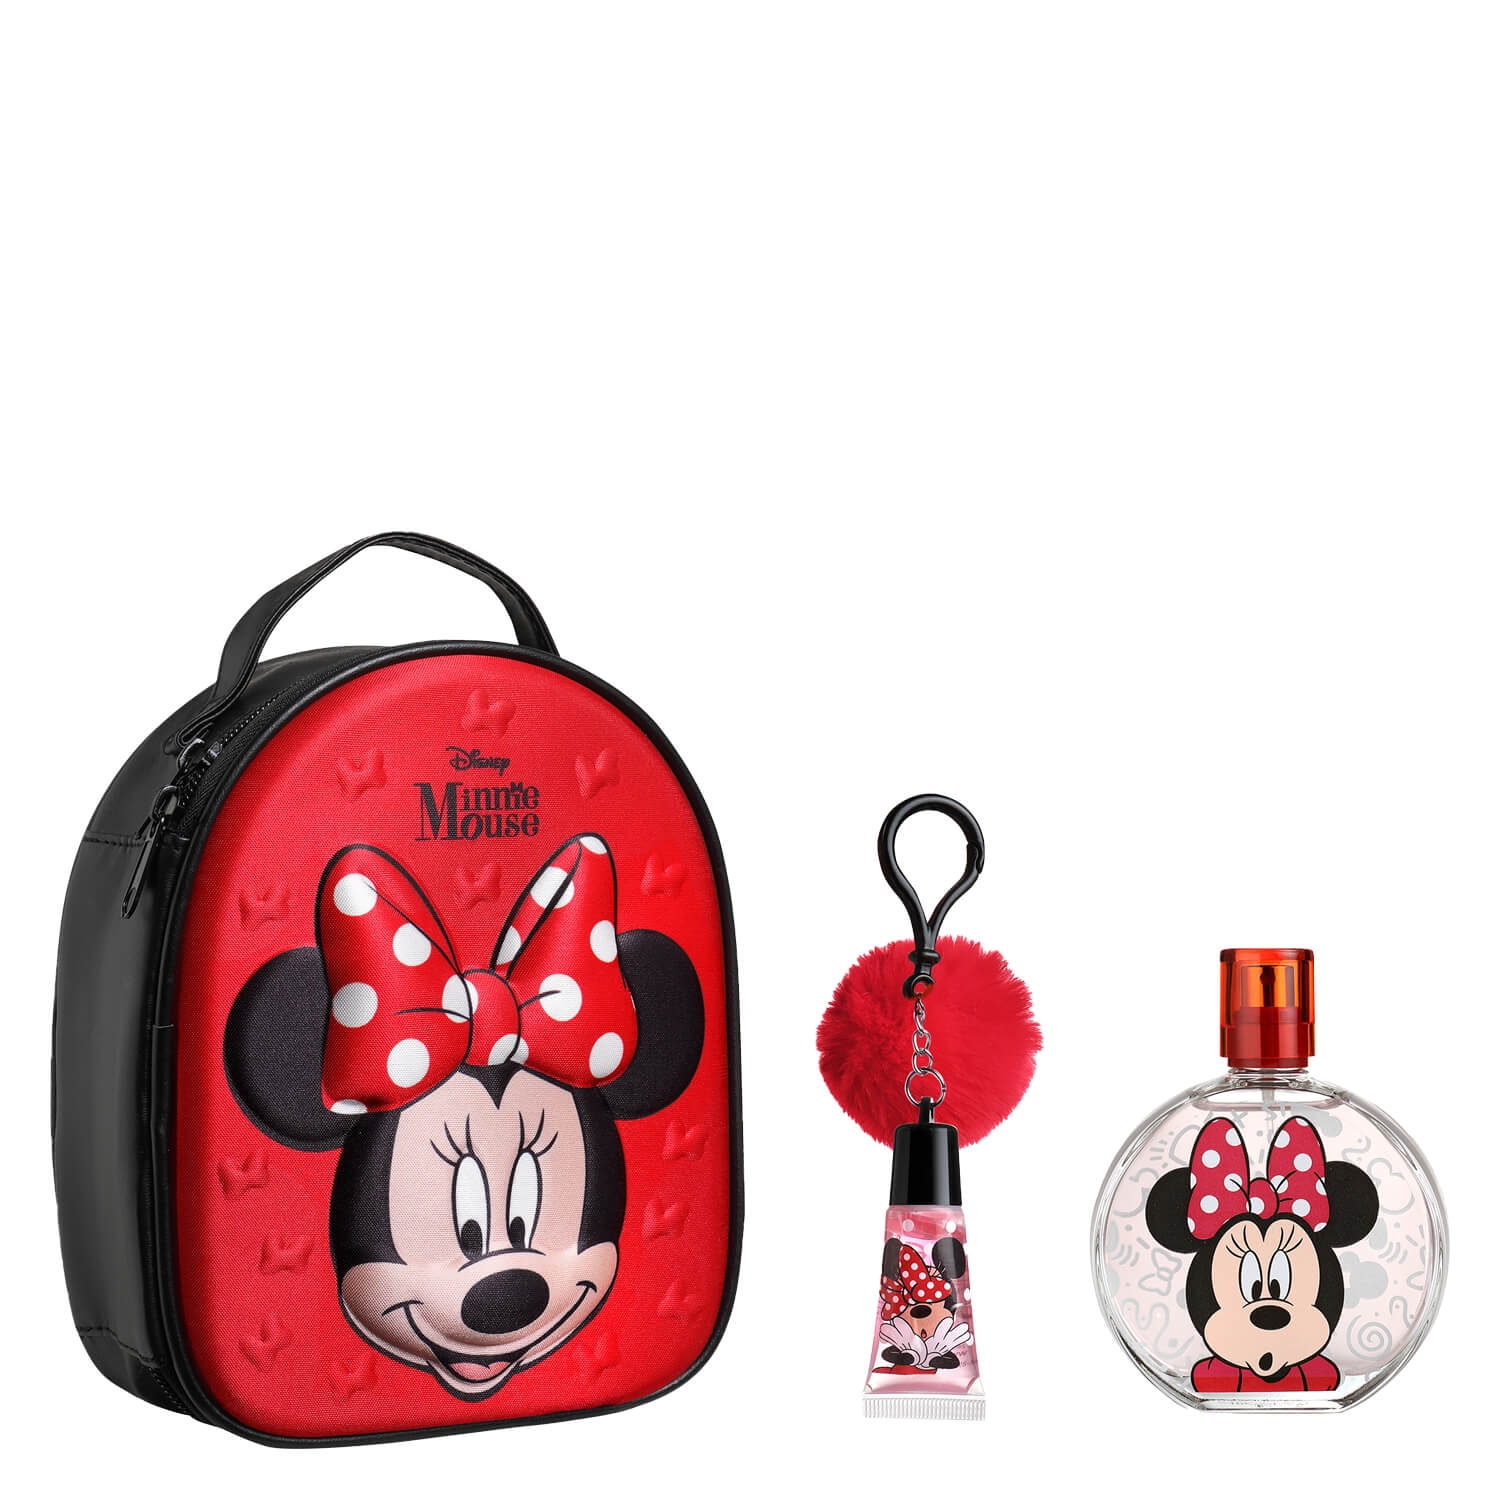 Product image from Kids Specials - Minnie Mouse Beauty Set